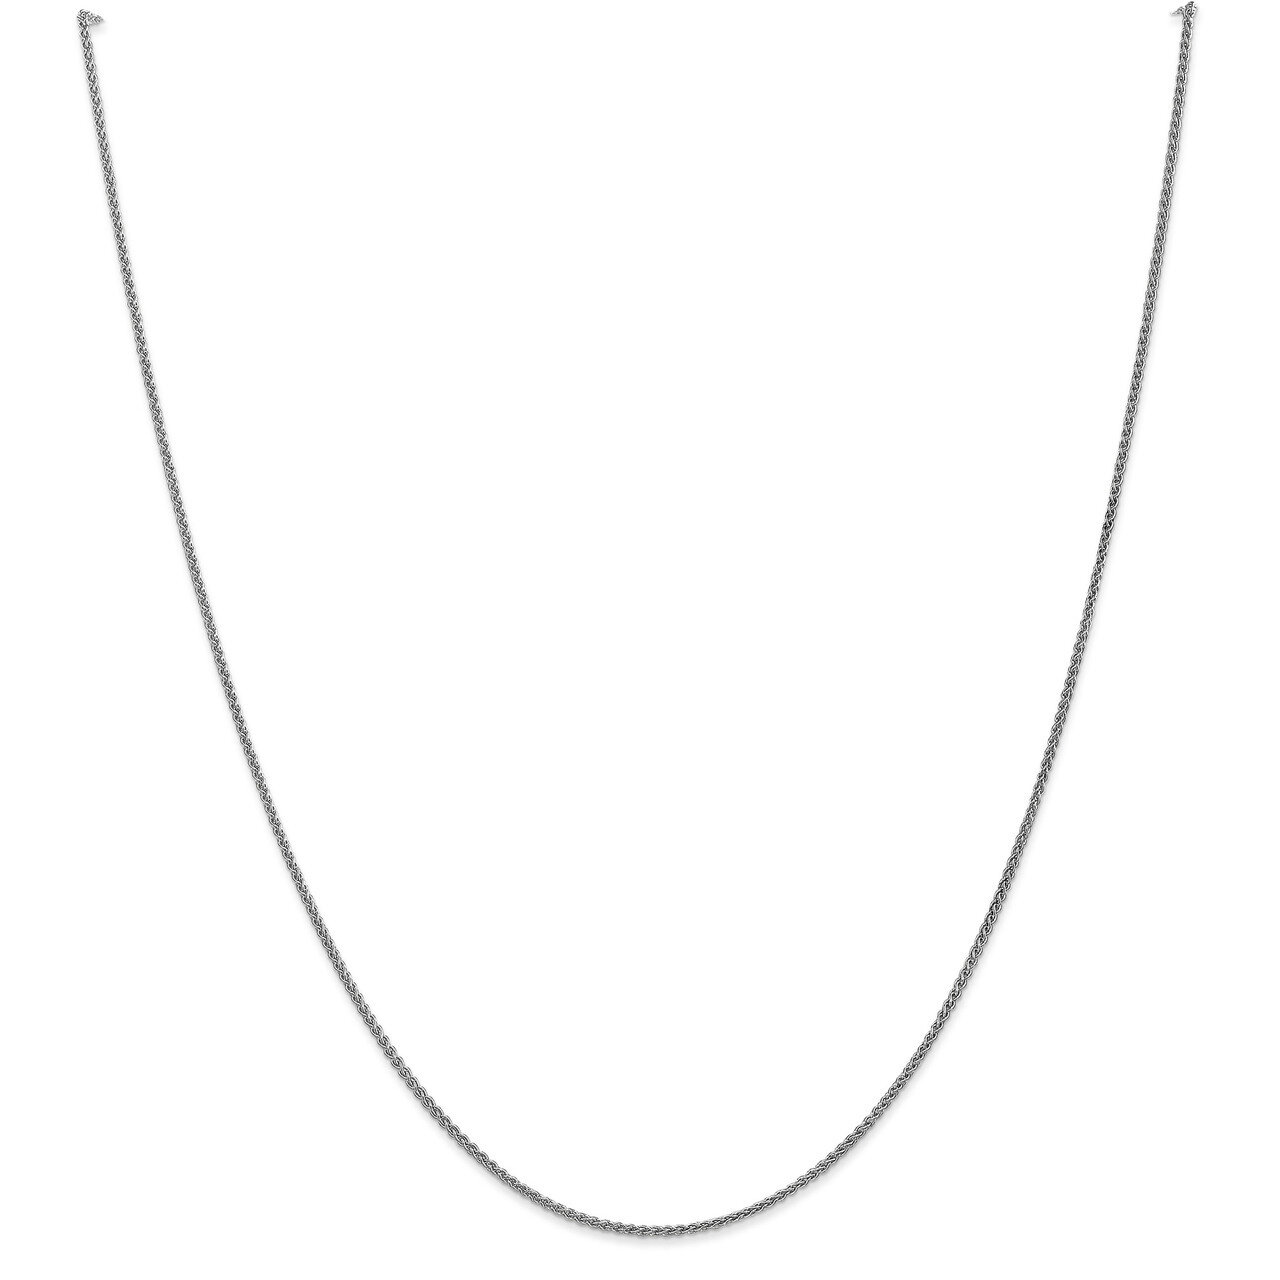 24 Inch 1.25mm Solid Polished Spiga Chain 10k White Gold 10WSP030-24